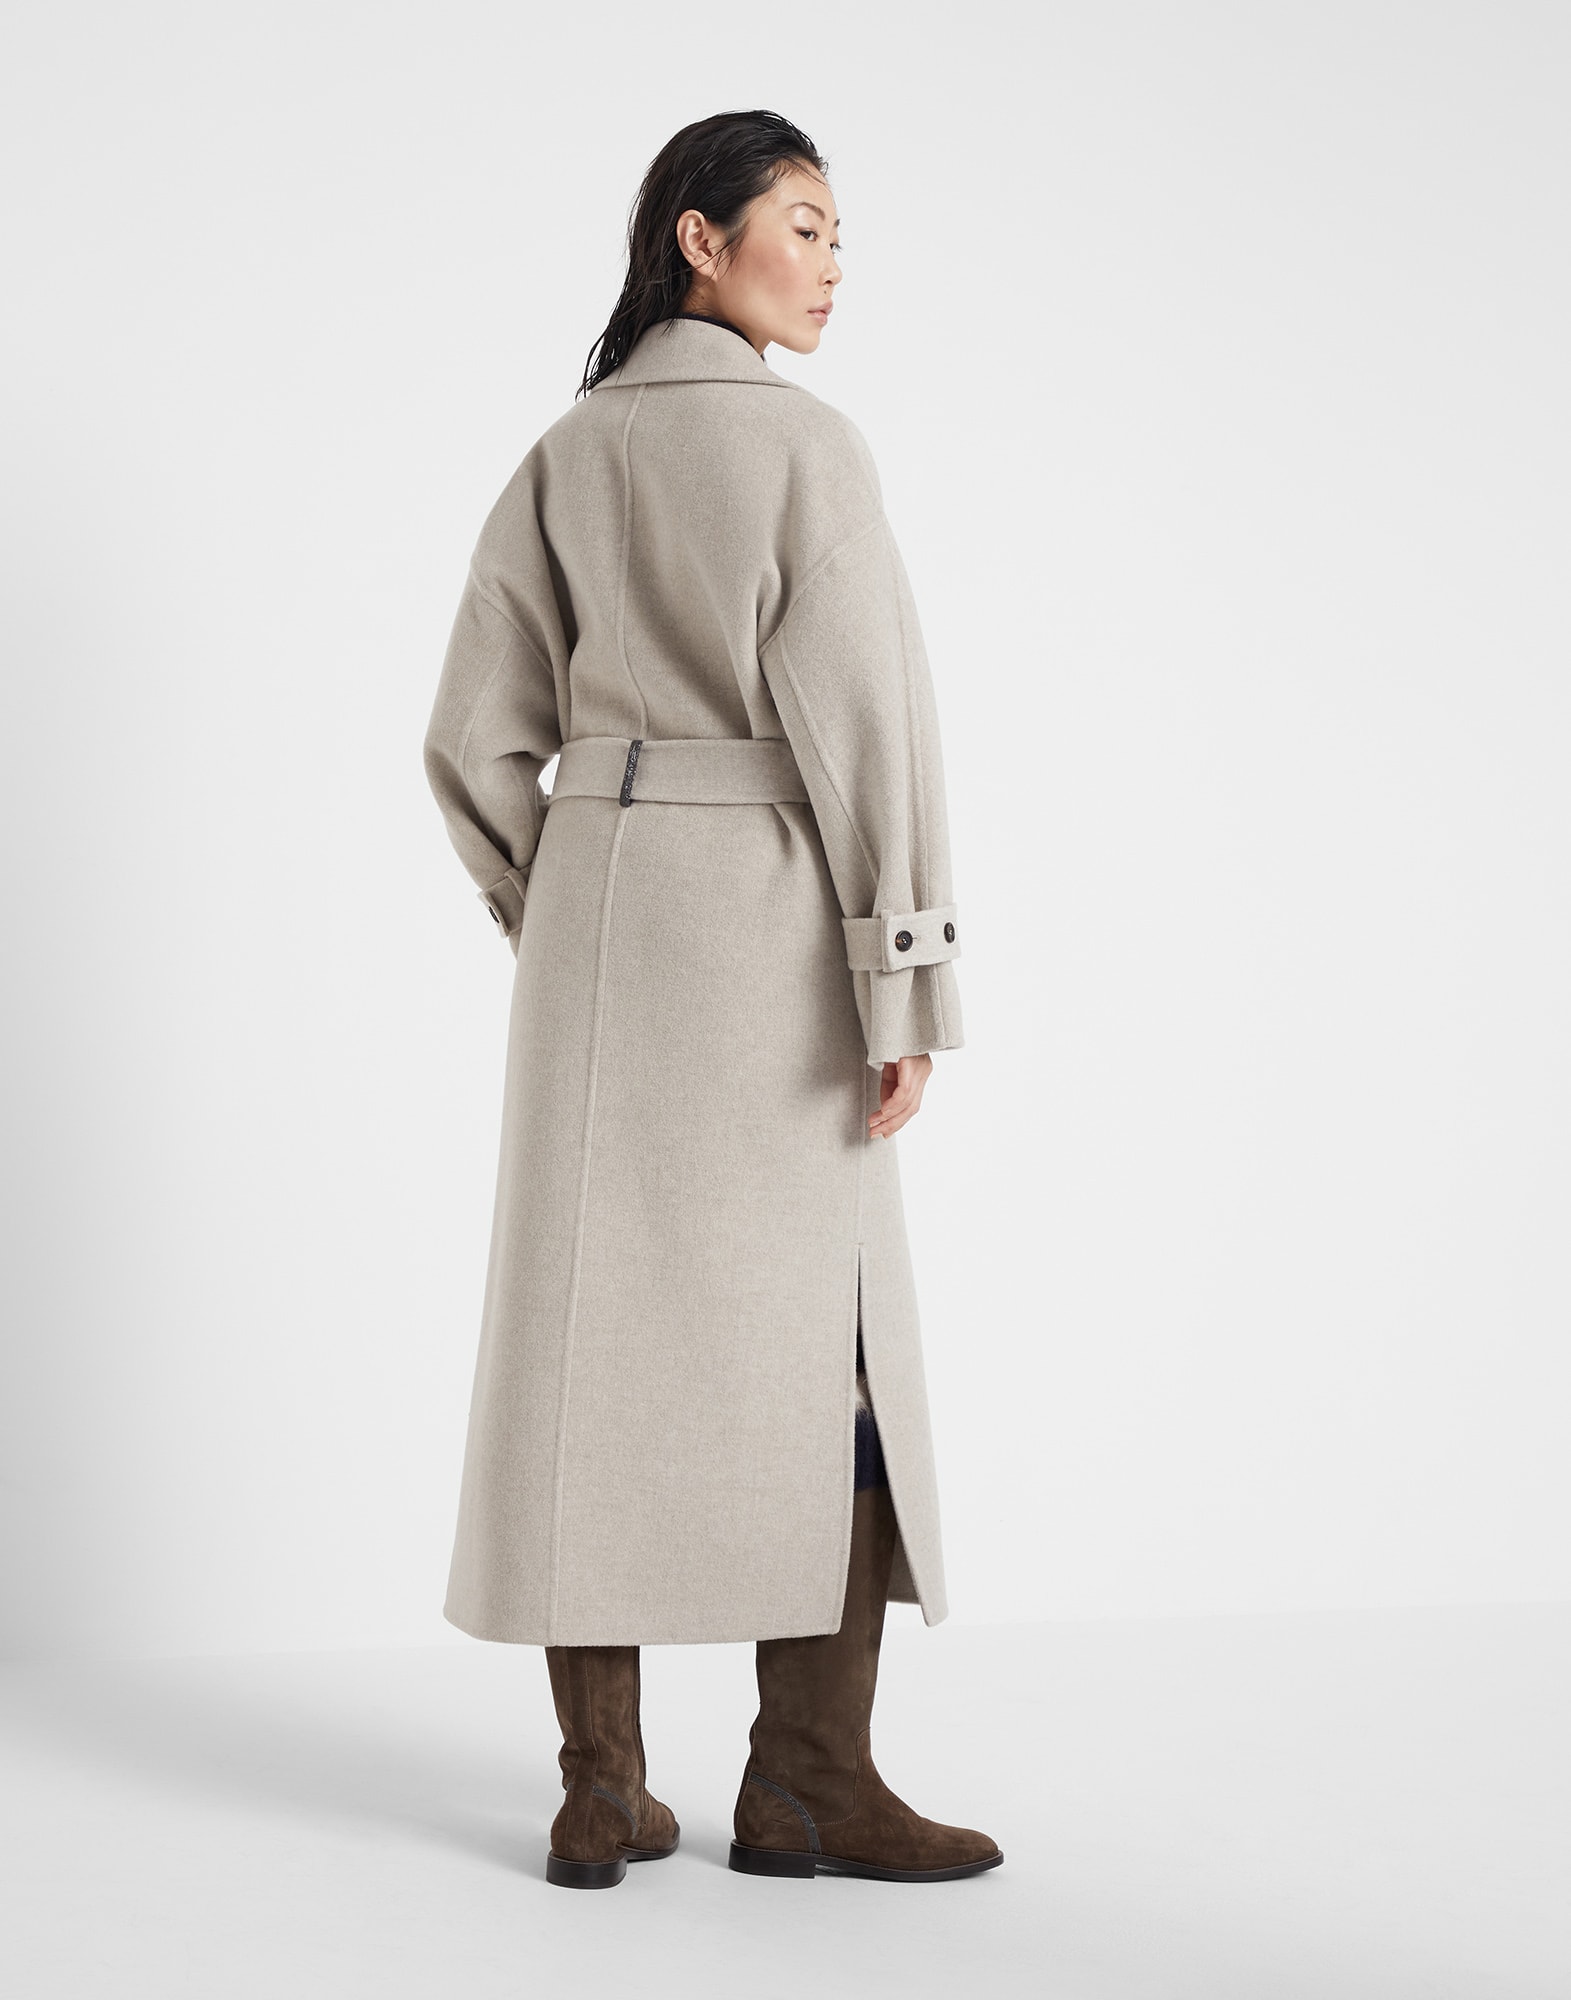 Handcrafted coat (232MD5329796) for Woman | Brunello Cucinelli